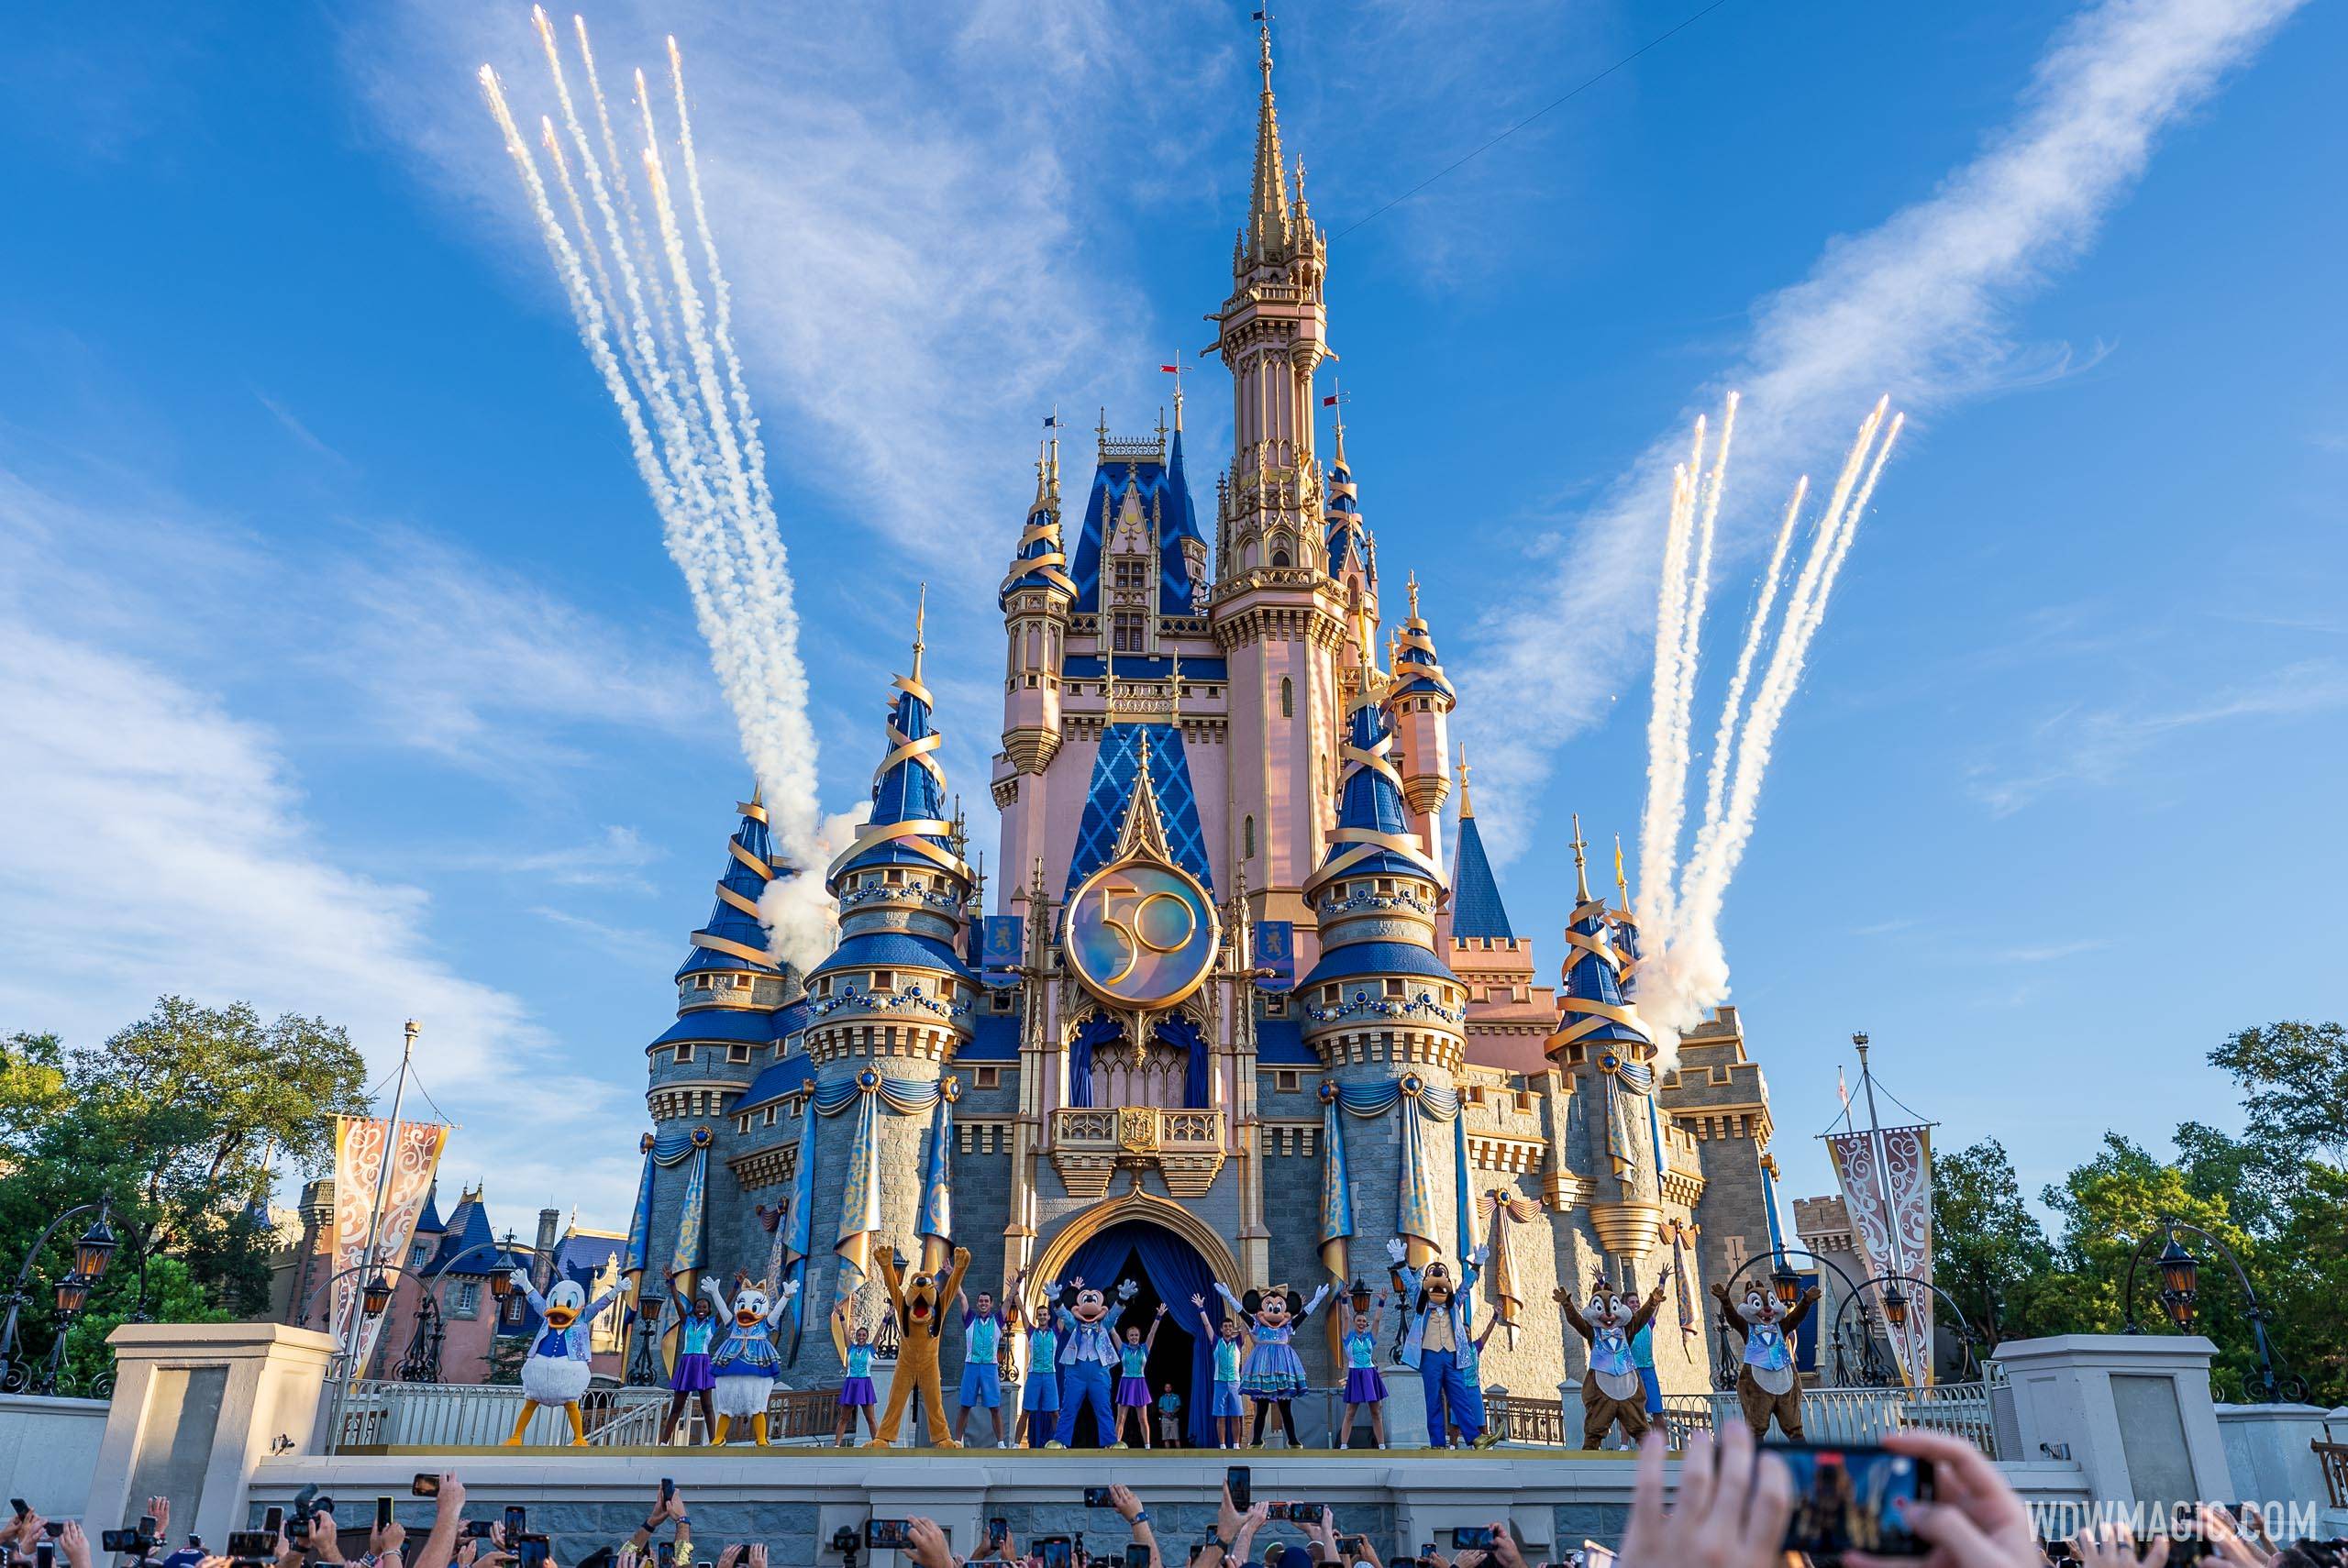 A new castle show for the 50th celebration will open at Magic Kingdom in 2022